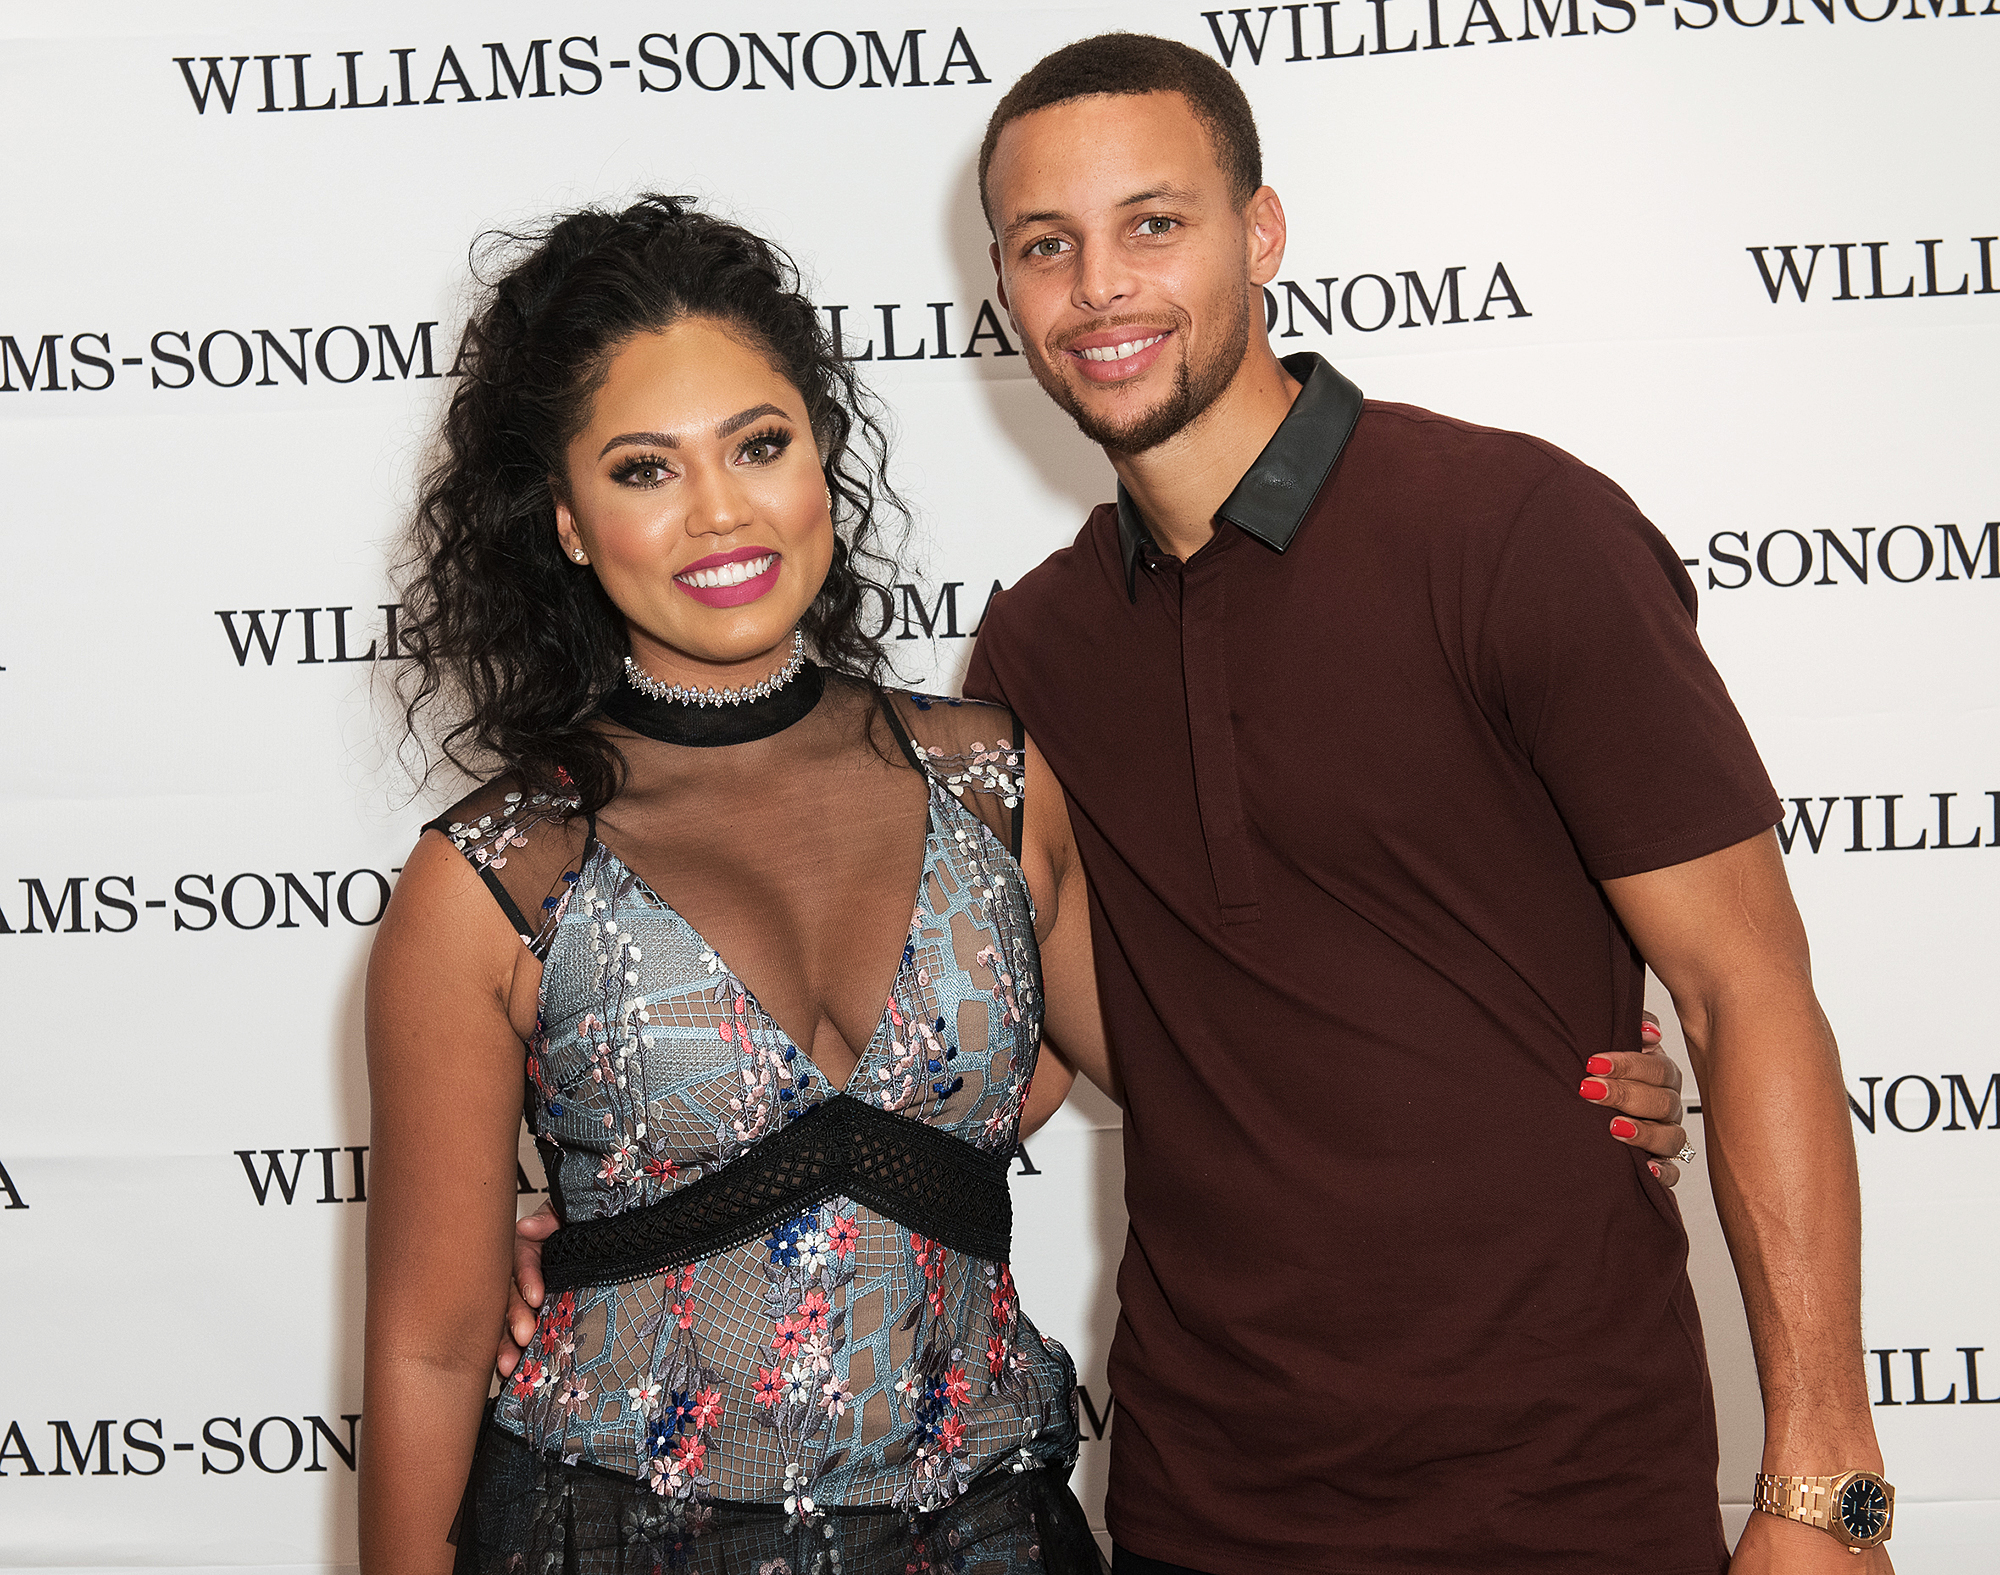 Stephen Curry's wife Ayesha Curry reveals she is trying to stay